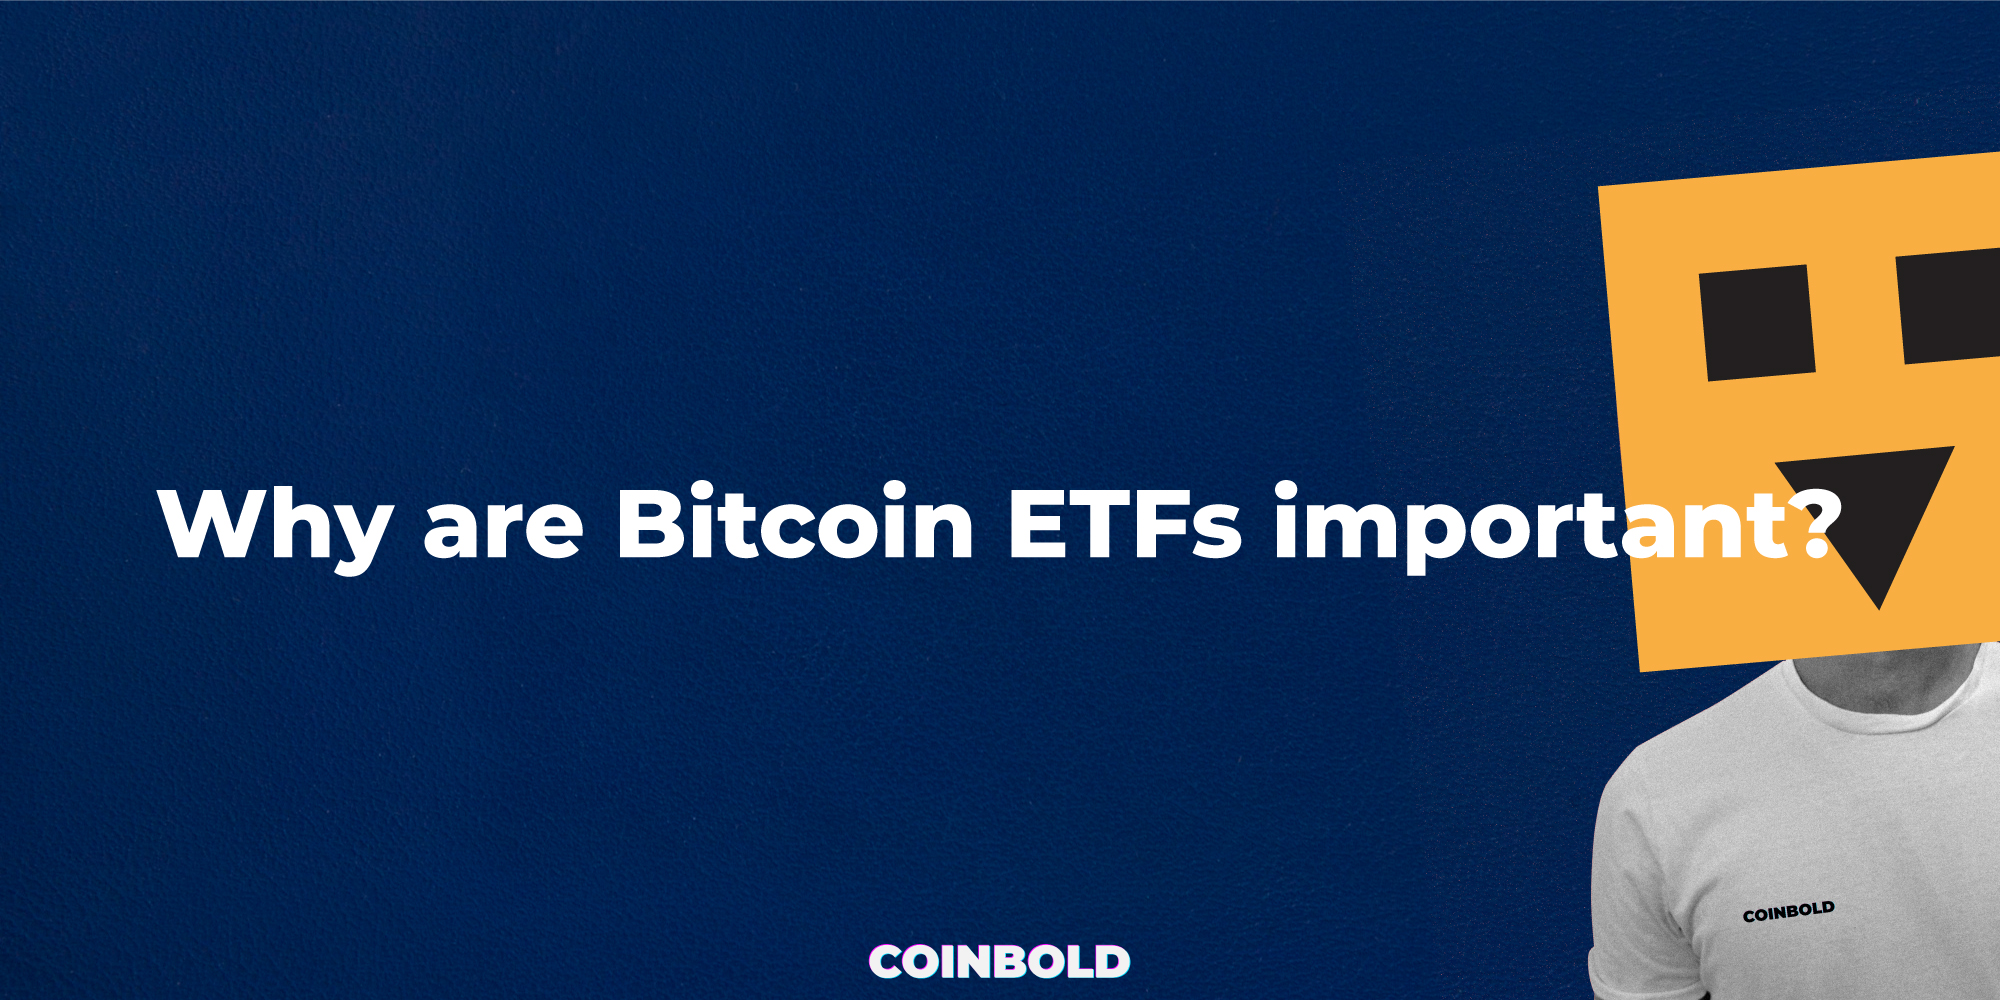 Why are Bitcoin ETFs important?